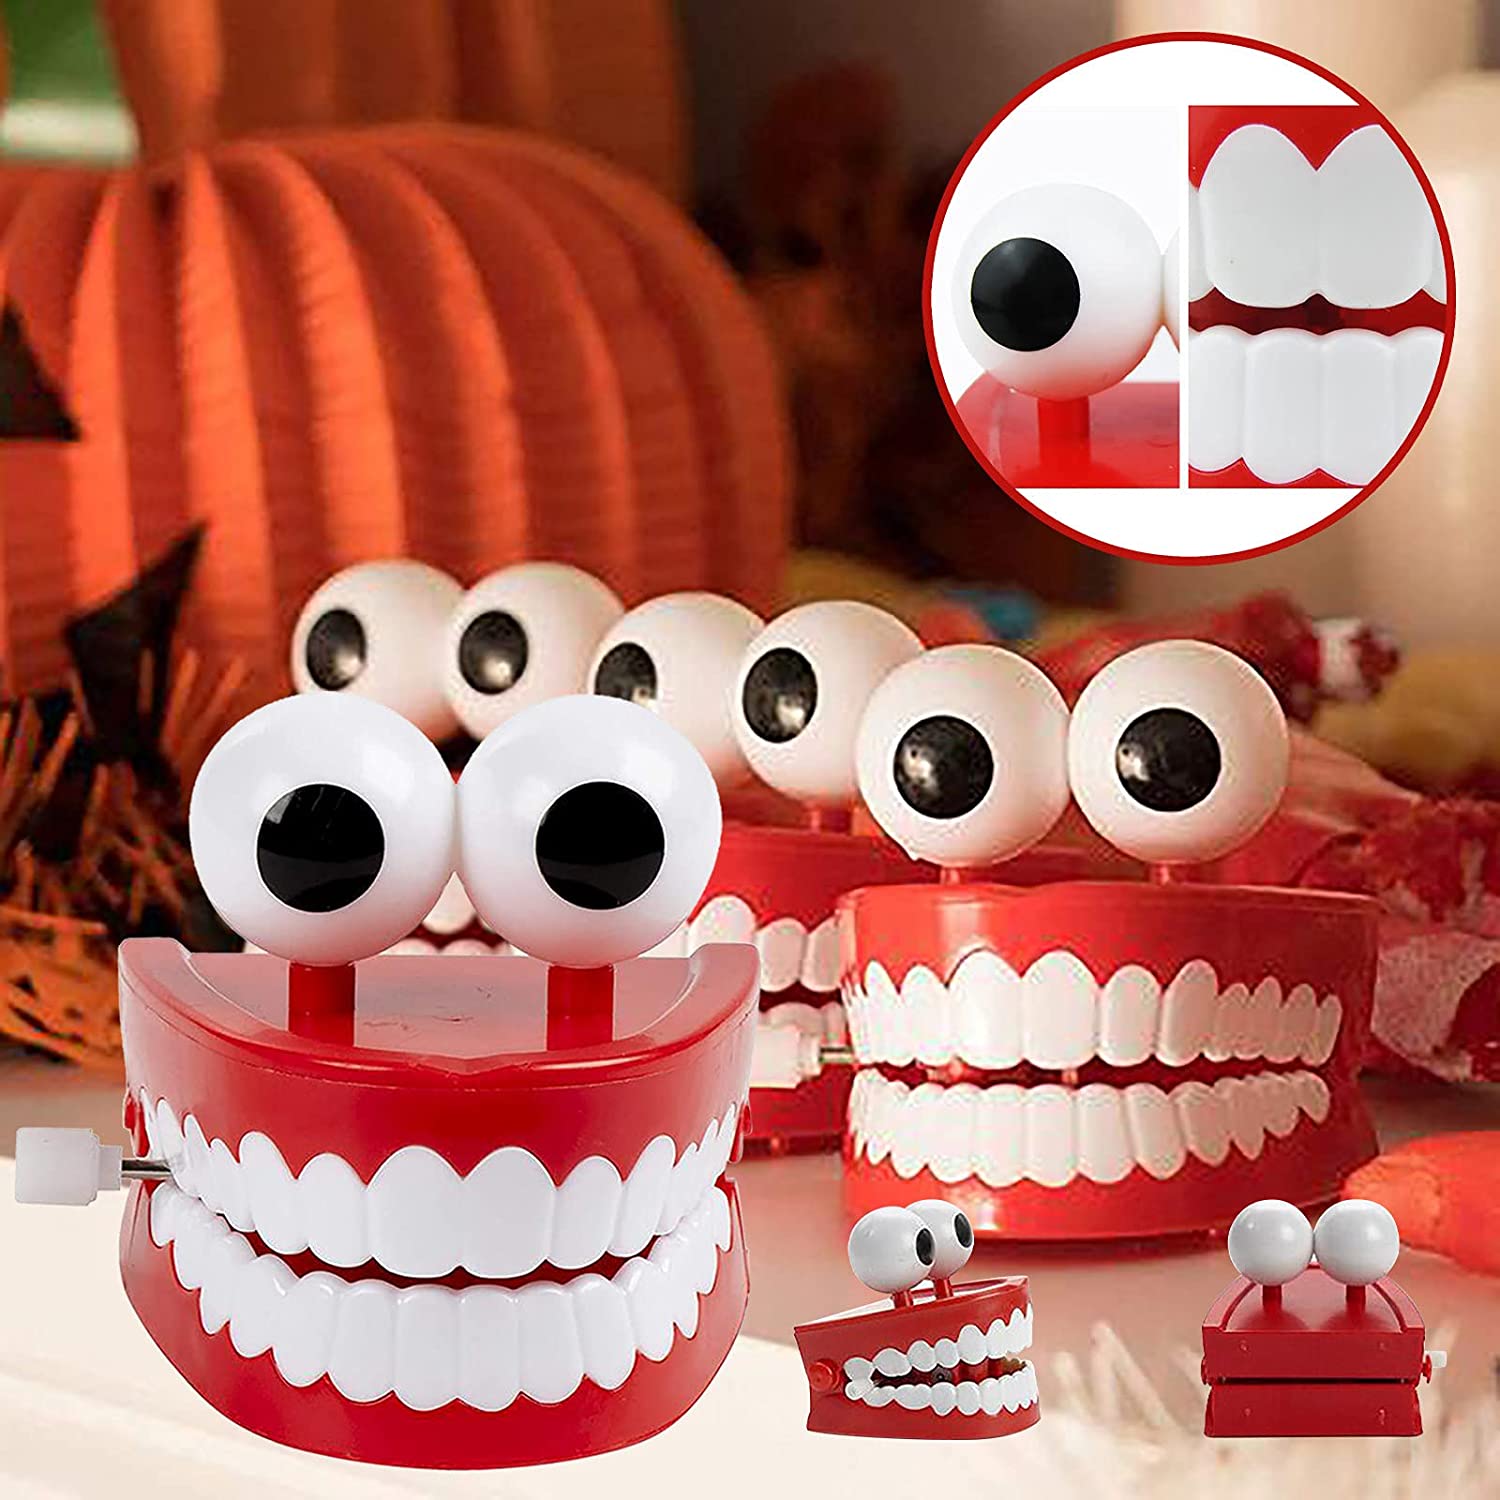 (🎄Early Christmas Sale- 49% OFF) Chattering Teeth Wind Up Toy